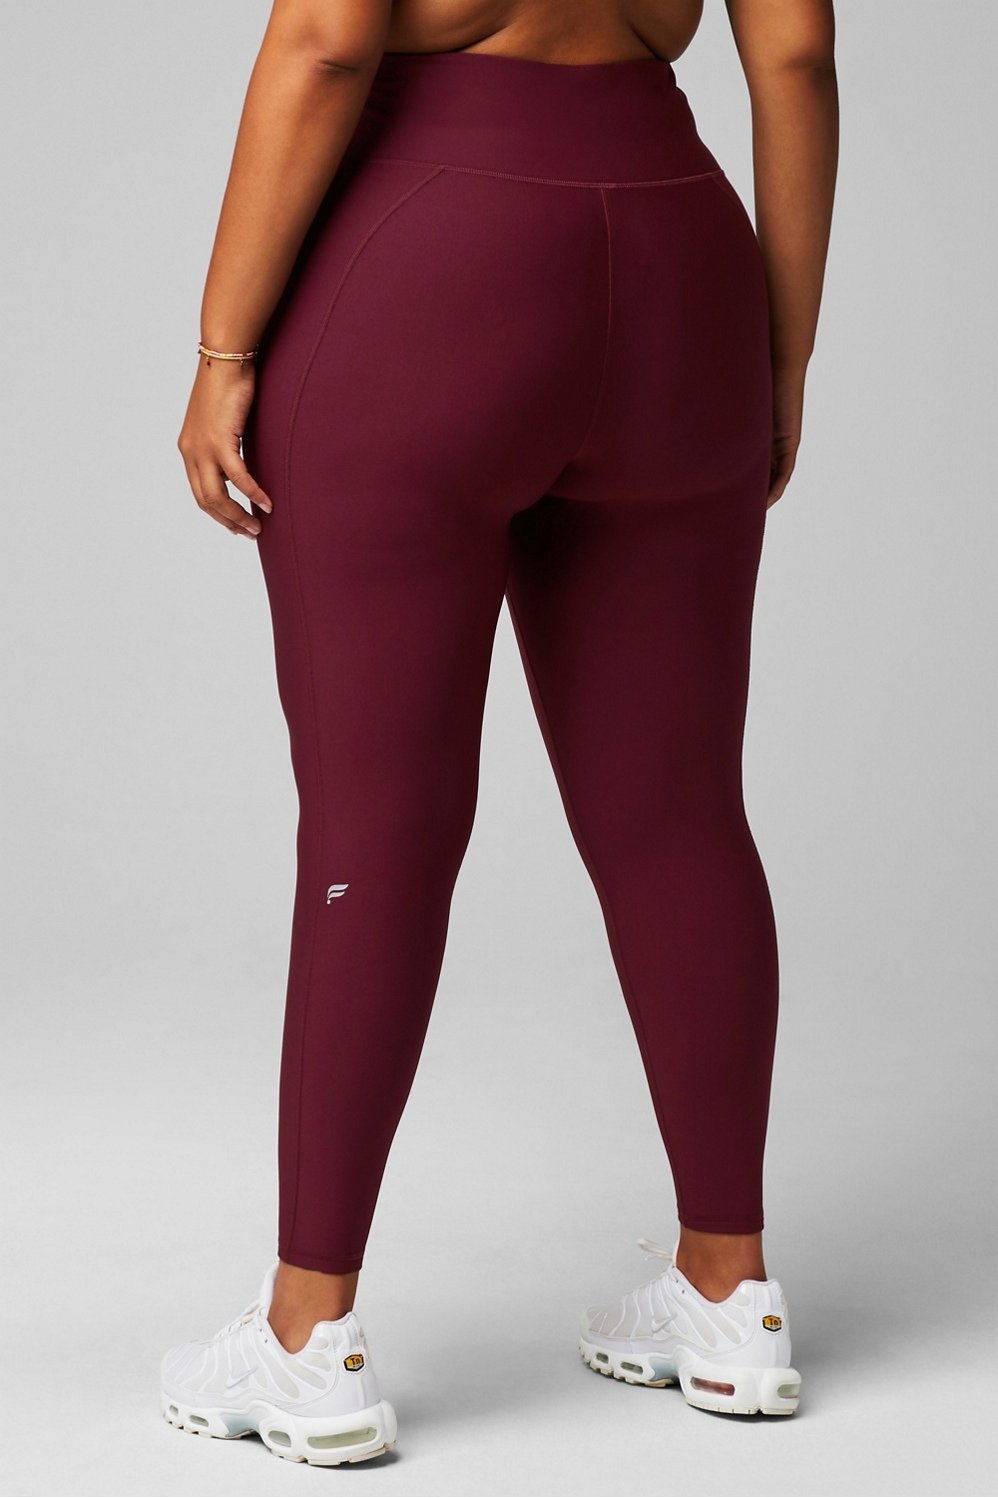 Wild Fable Size Med High-Waisted Side Pockets Ankle Length Leggings  Berry/Maroon